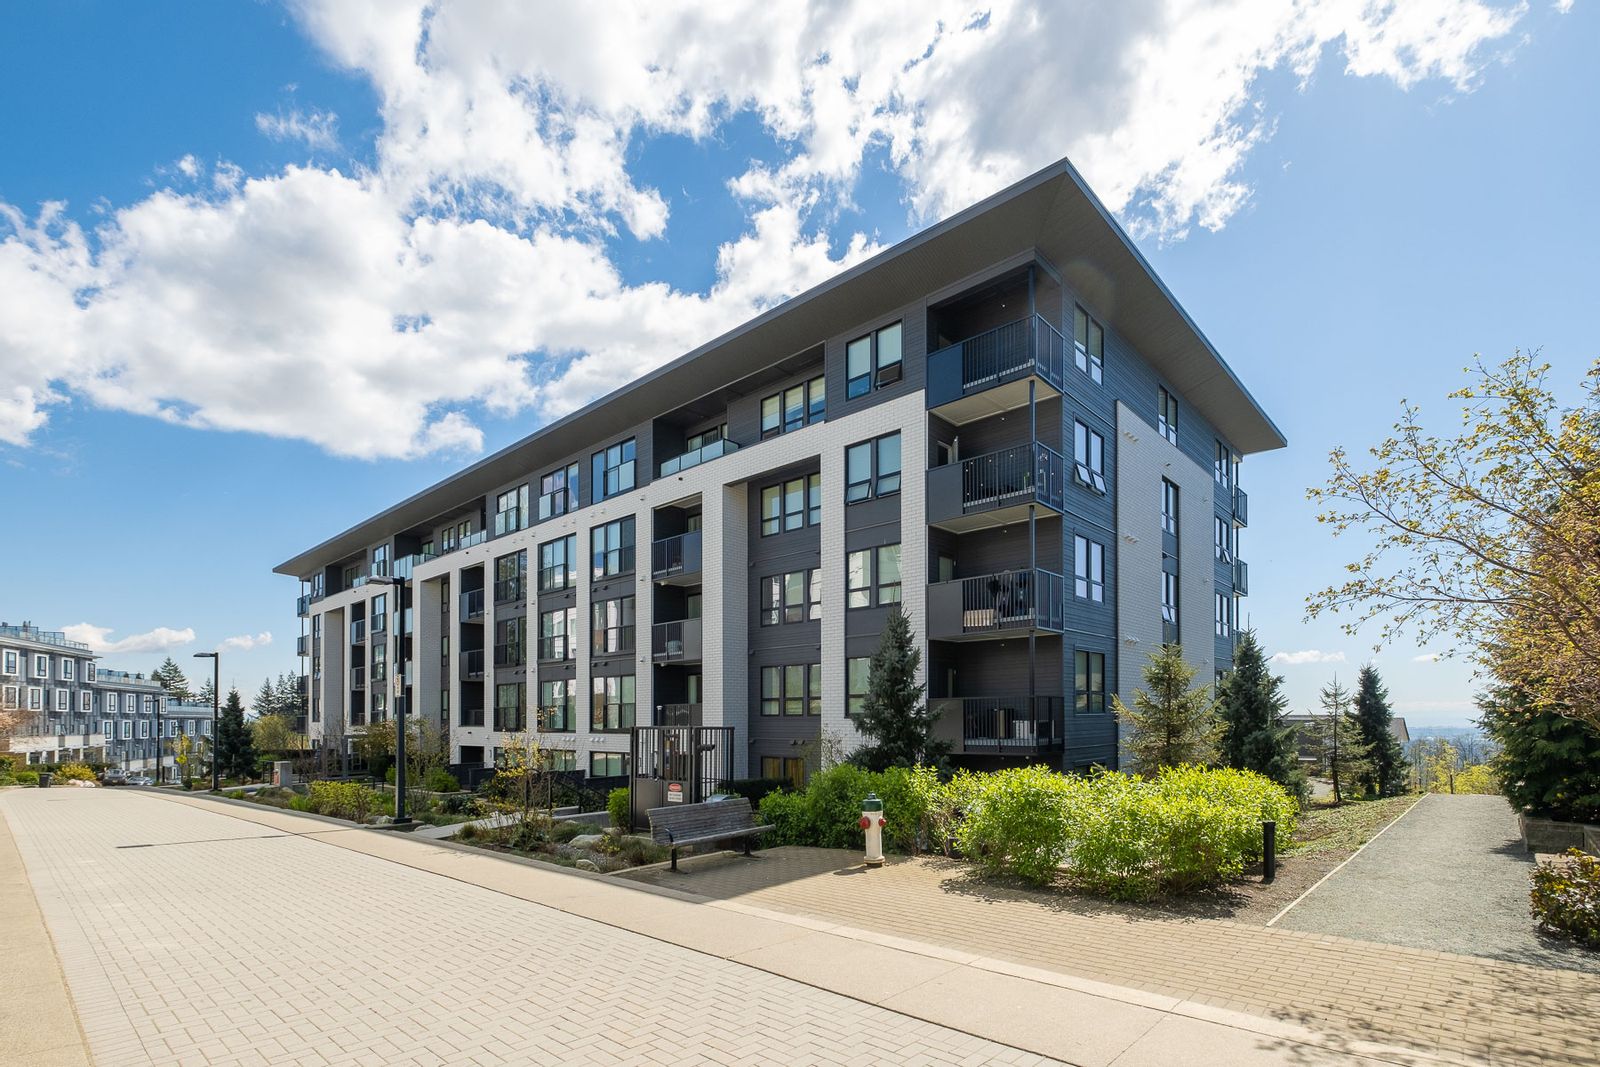 Just Listed - 204 9228 Slopes Mews, Burnaby, SFU, UniverCity